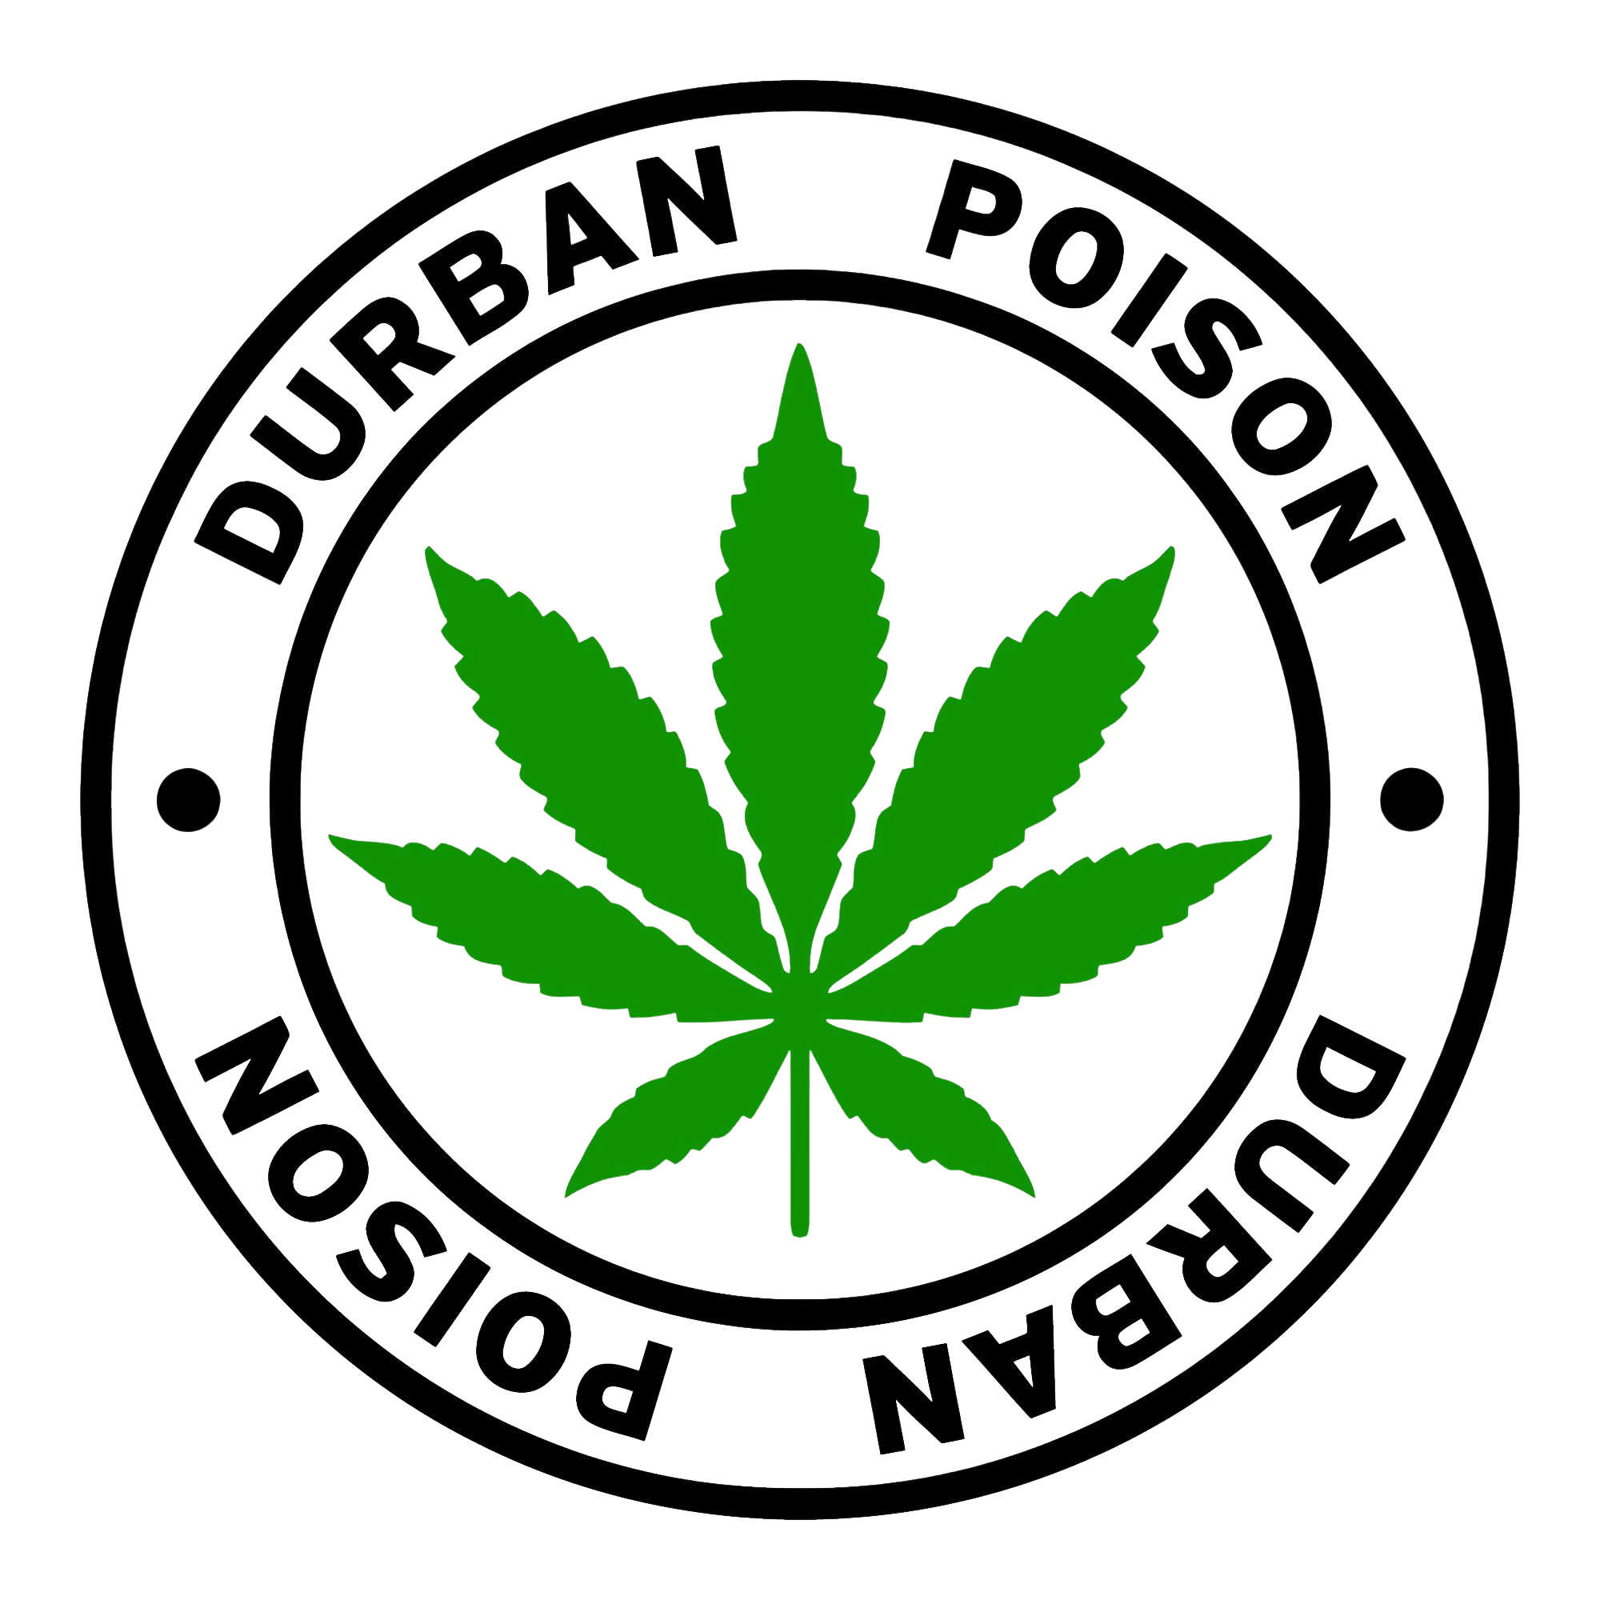 image of durban poison lineage